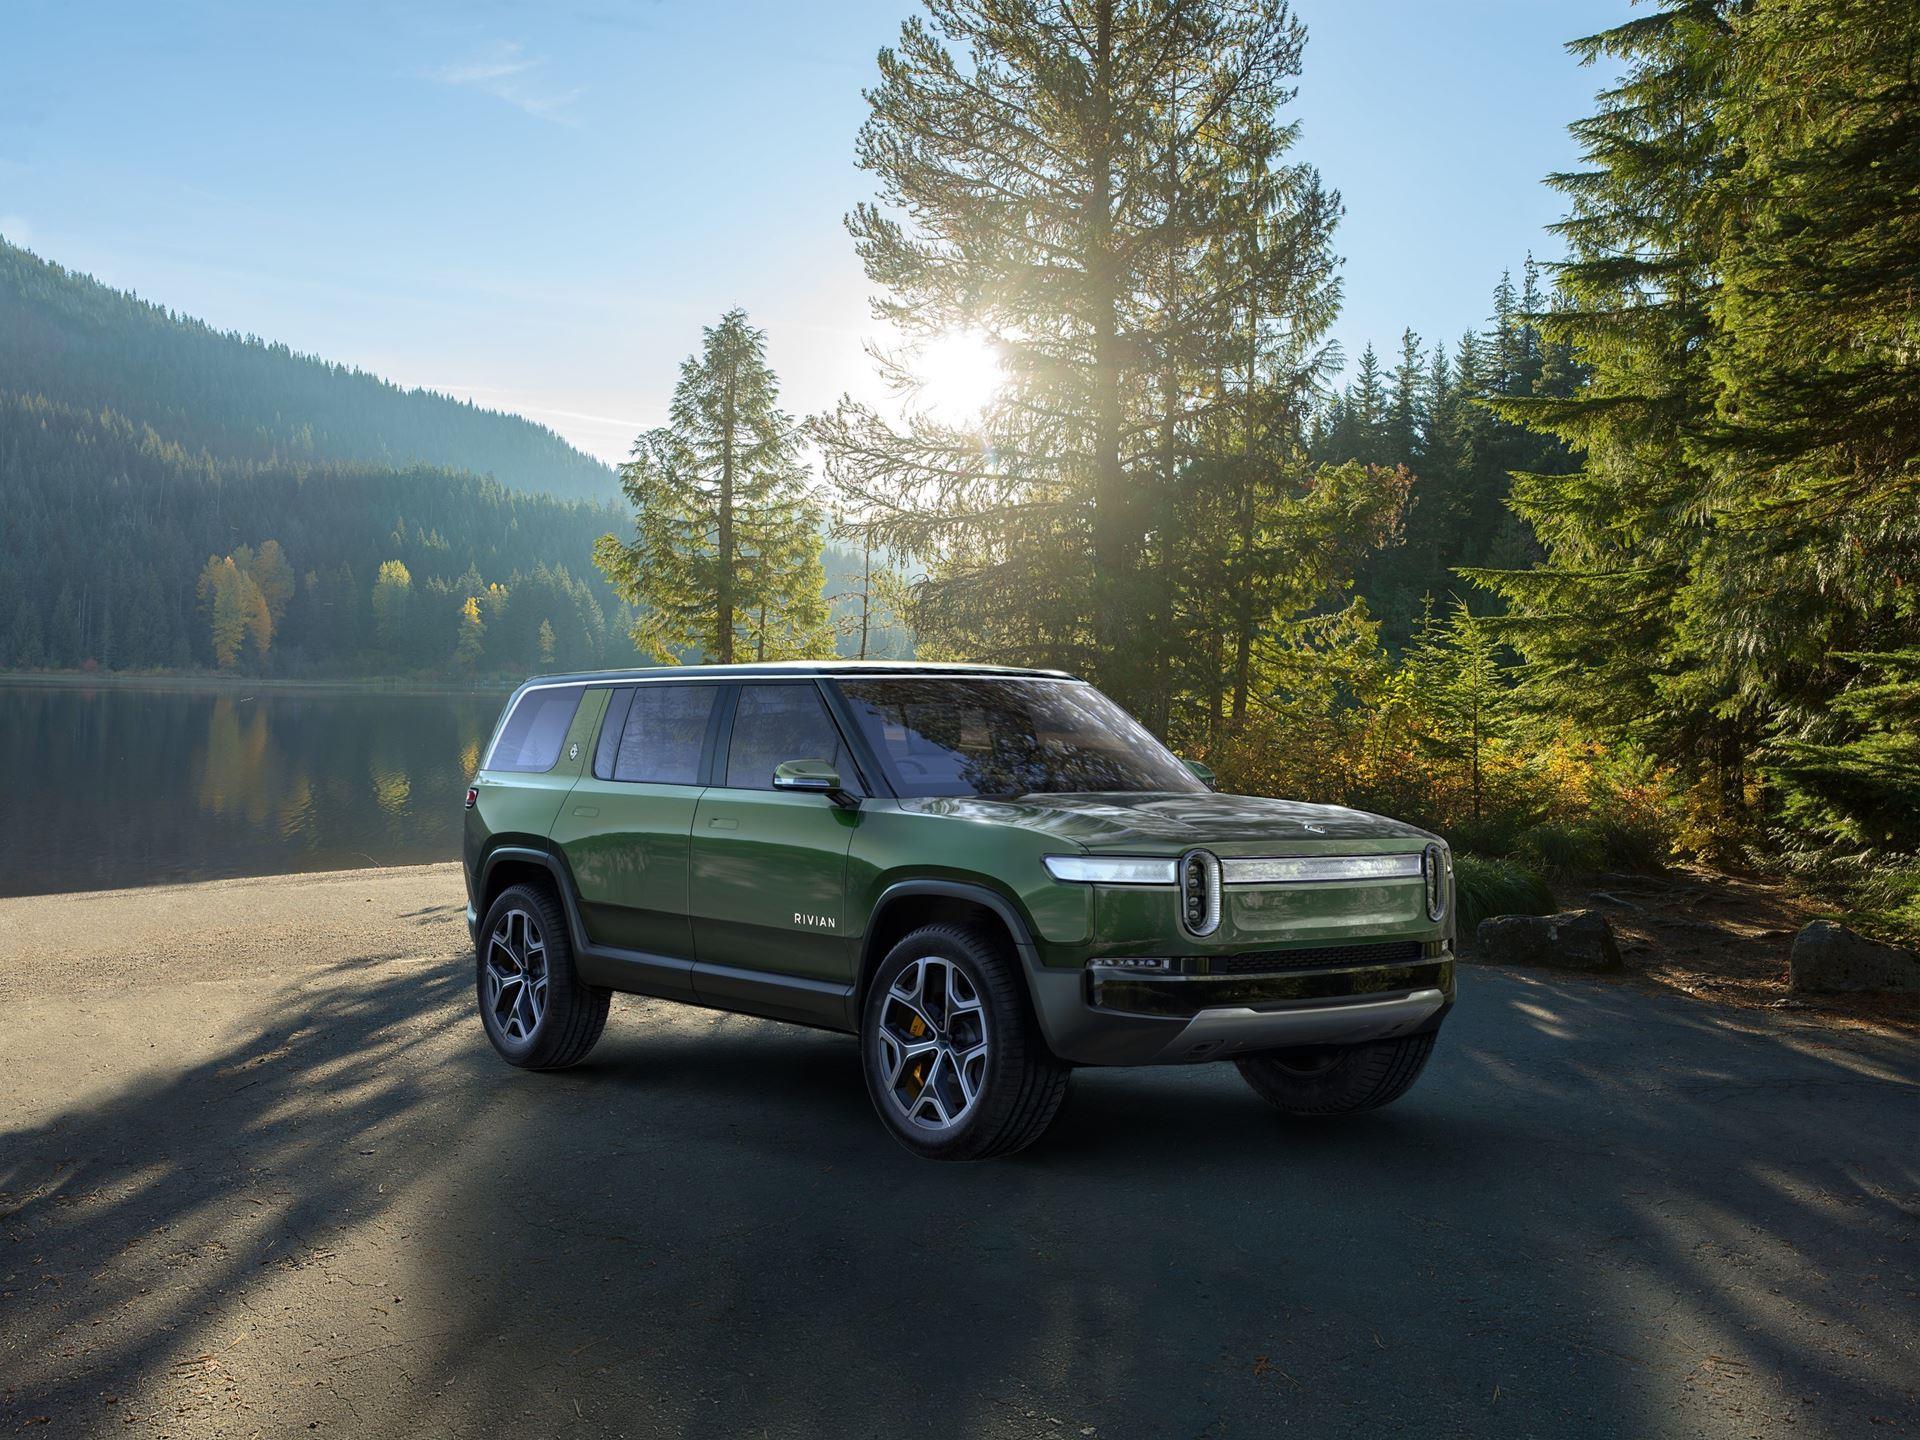 2018 Rivian R1S News and Information 